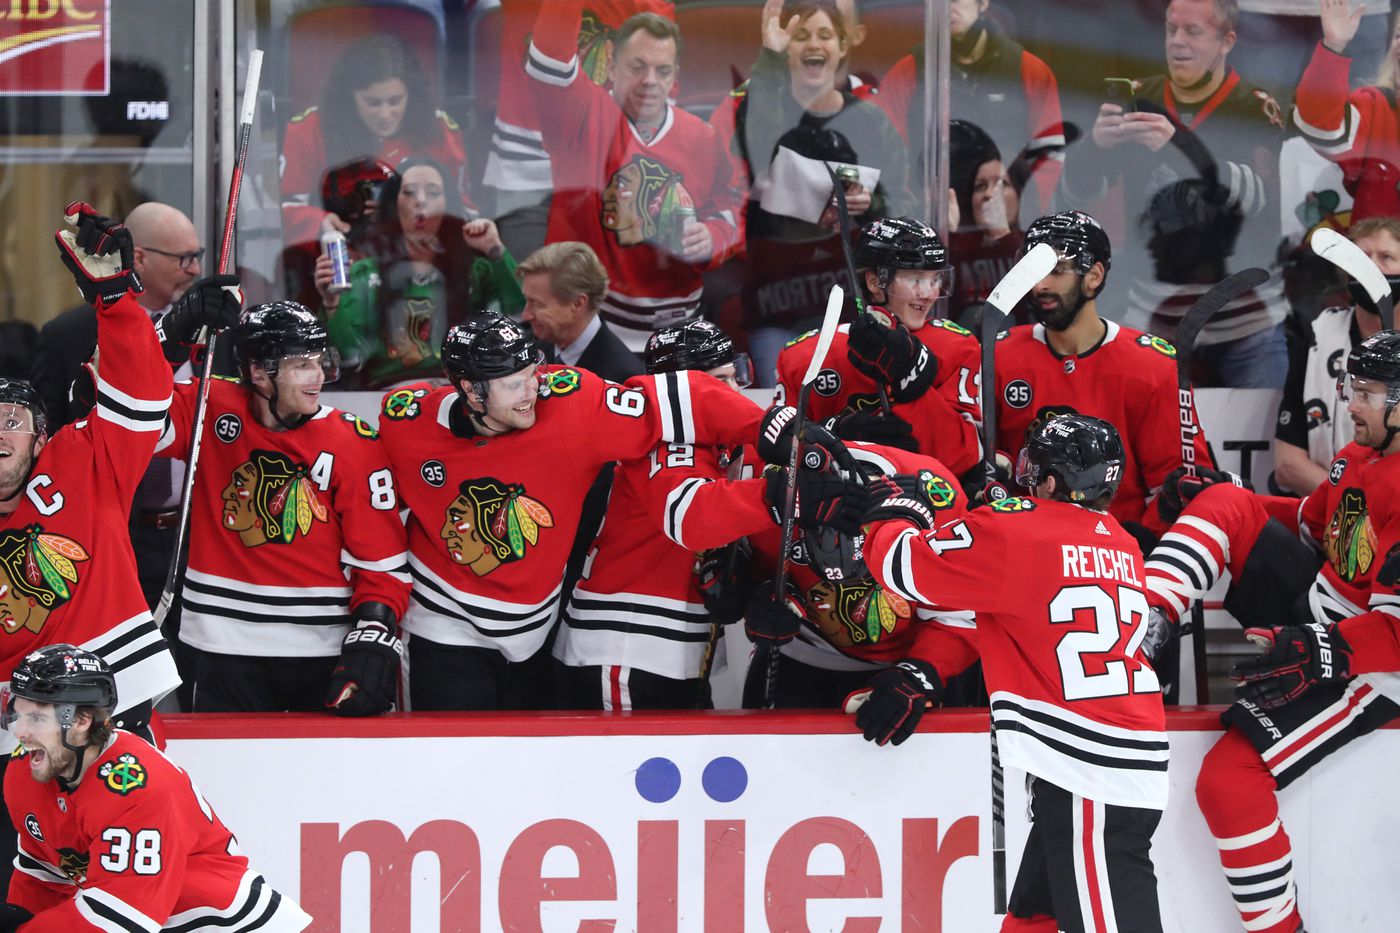 Chicago Blackhawks players congratulate center Philipp Kurashev (23) after an officials review ruled his goal was good for a 3-2 overtime win over the Montreal Canadiens at United Center on Jan. 13, 2022, in Chicago.